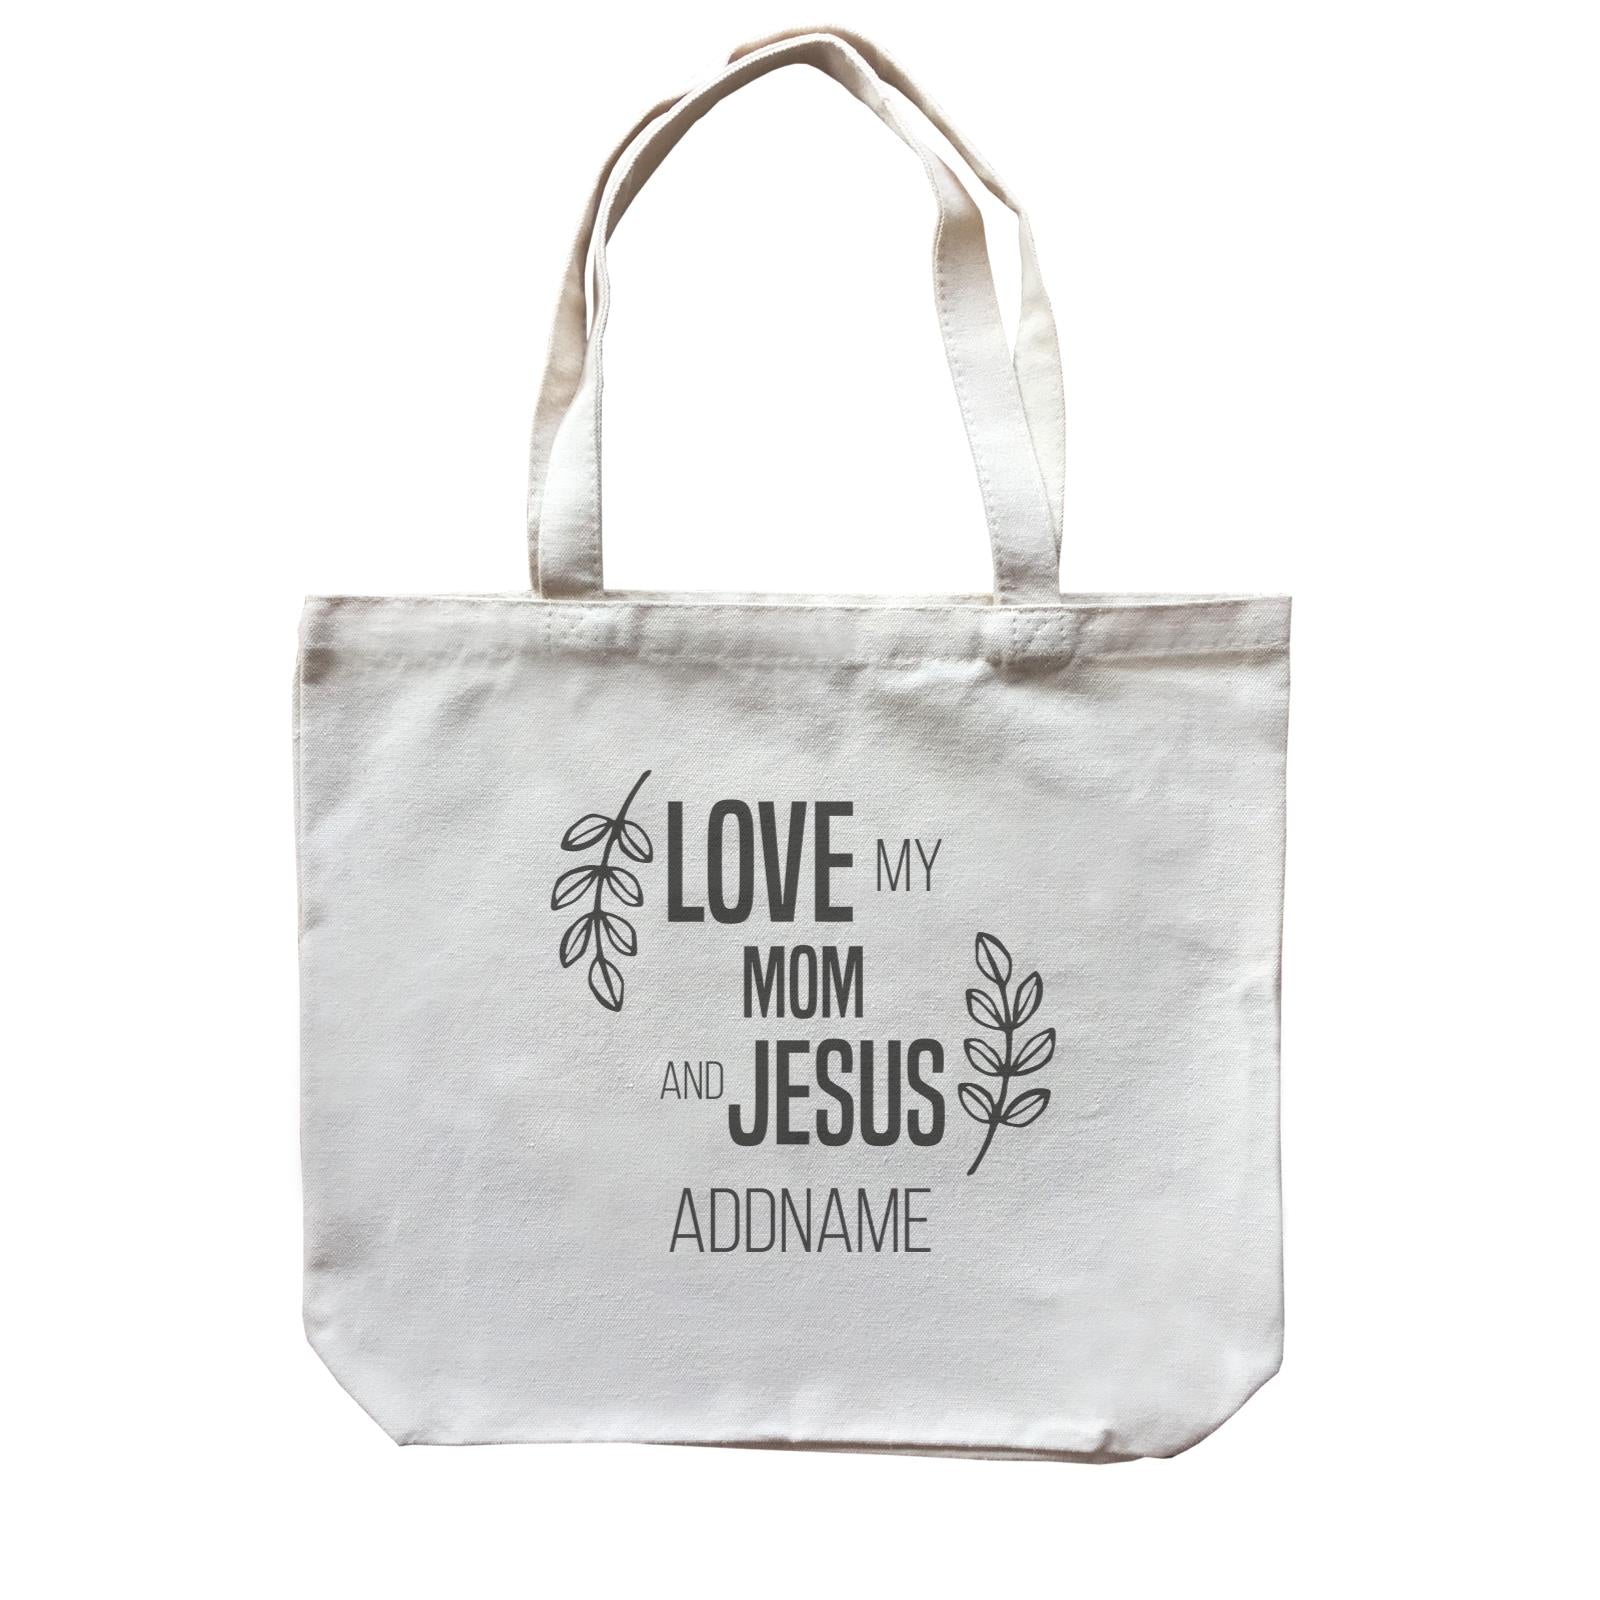 Christian Series Love My Mom And Jesus Addname Canvas Bag